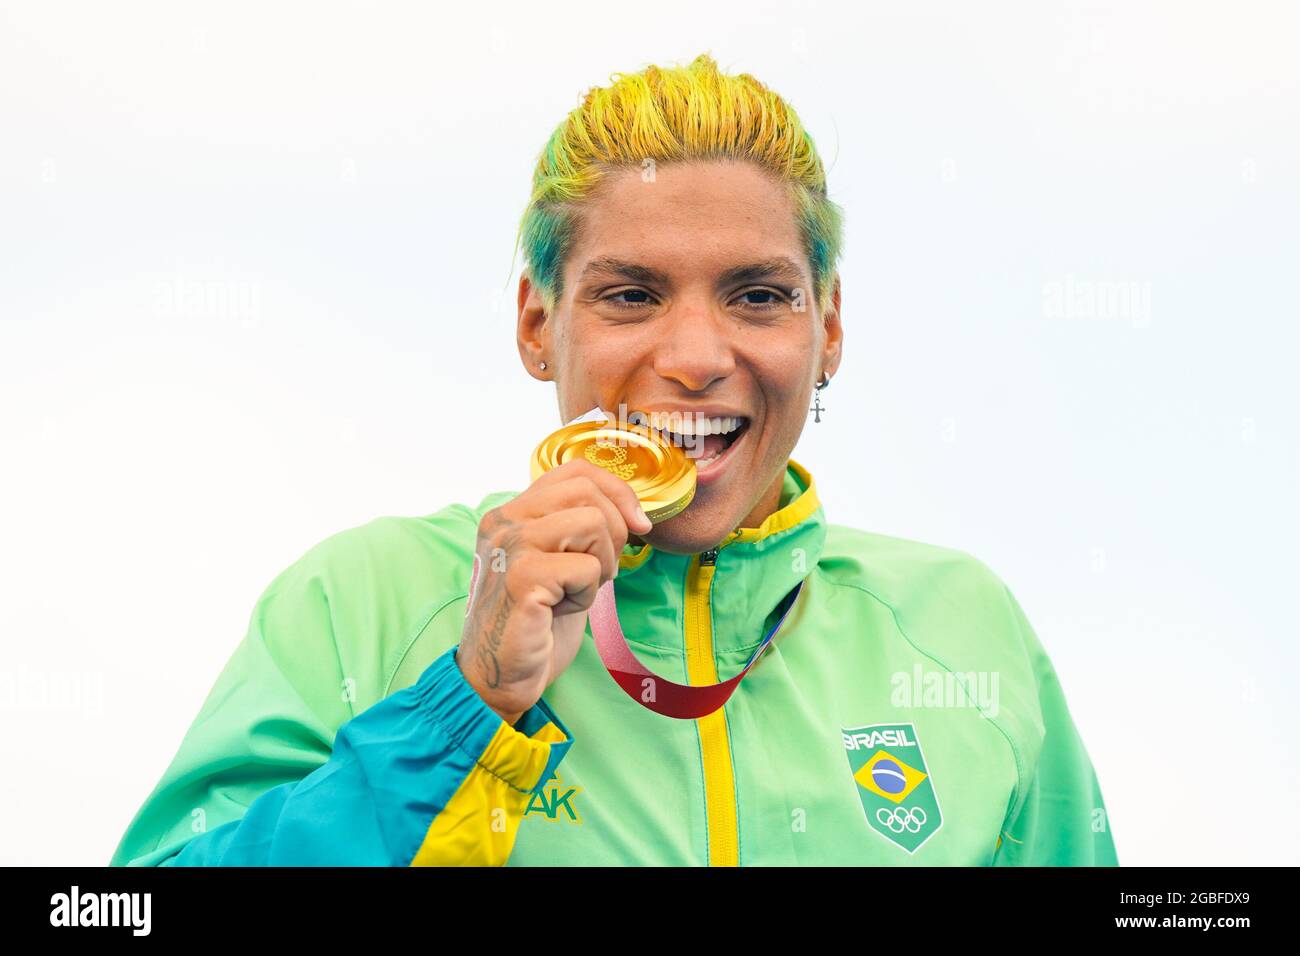 TOKYO, JAPAN - AUGUST 4: Ana Marcela Cunha of Brasil poses with her golden medal during the Medal Ceremony of Marathon Swimming during the Tokyo 2020 Olympic Games at the Odaiba Marine Park on August 4, 2021 in Tokyo, Japan (Photo by Ronald Hoogendoorn/Orange Pictures) NOCNSF Stock Photo